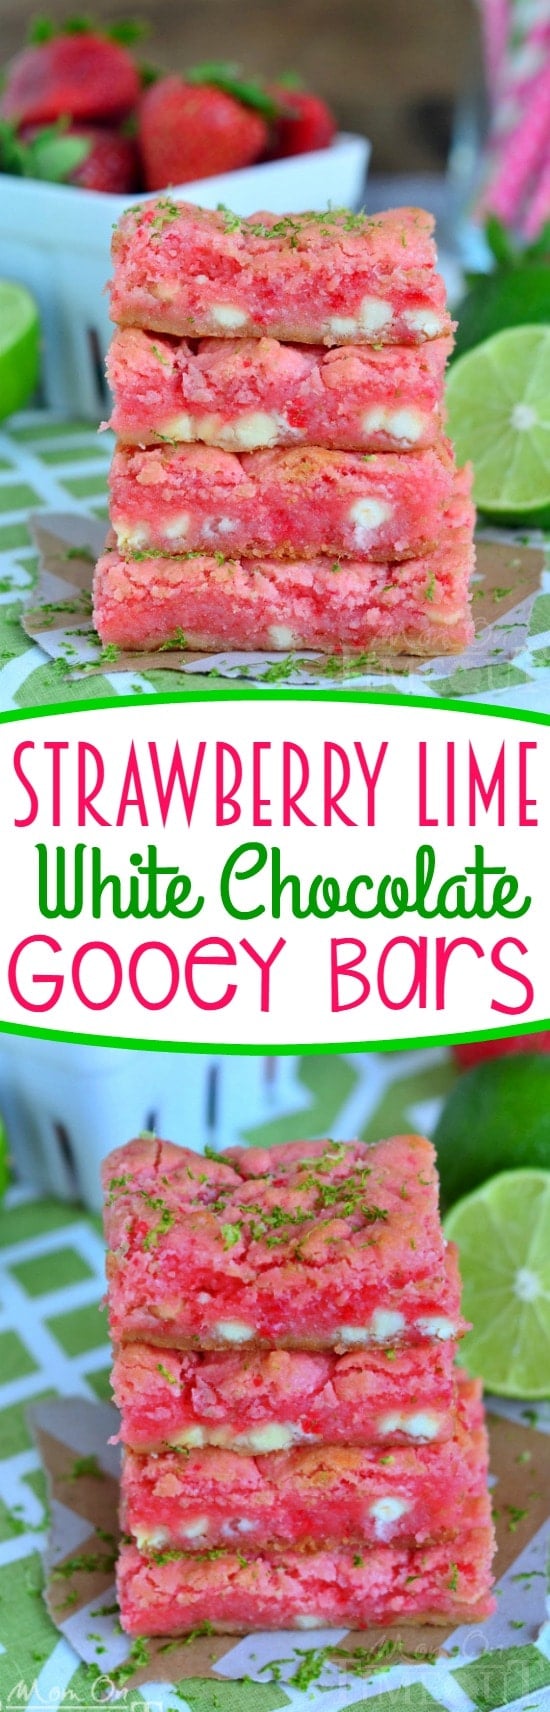 These easy Strawberry Lime White Chocolate Gooey Bars will make the perfect spring or summer time treat! Start with a cake mix and see what happens! Everyone goes crazy for this easy strawberry dessert!